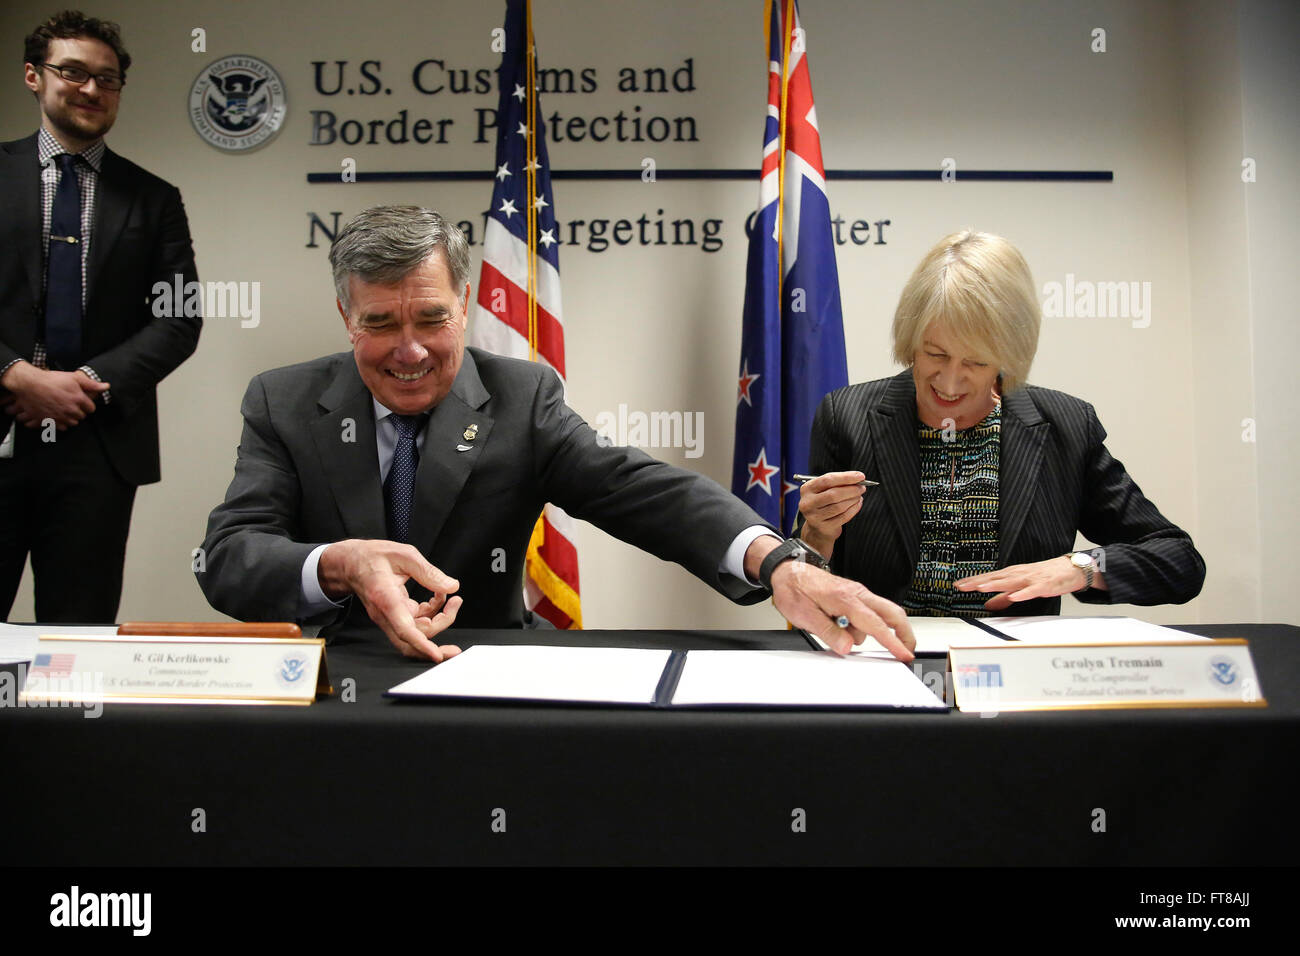 U.S. Customs and Border Protection Commissioner R. Gil Kerlikowske and New Zealand Customs Service Comptroller Carolyn Tremain switch documents as they sign a Declaration of Principles while meeting at the National Targeting Center in Herndon, Va., Feb. 25, 2016. (U.S. Customs and Border Protection Photo by Glenn Fawcett) Stock Photo